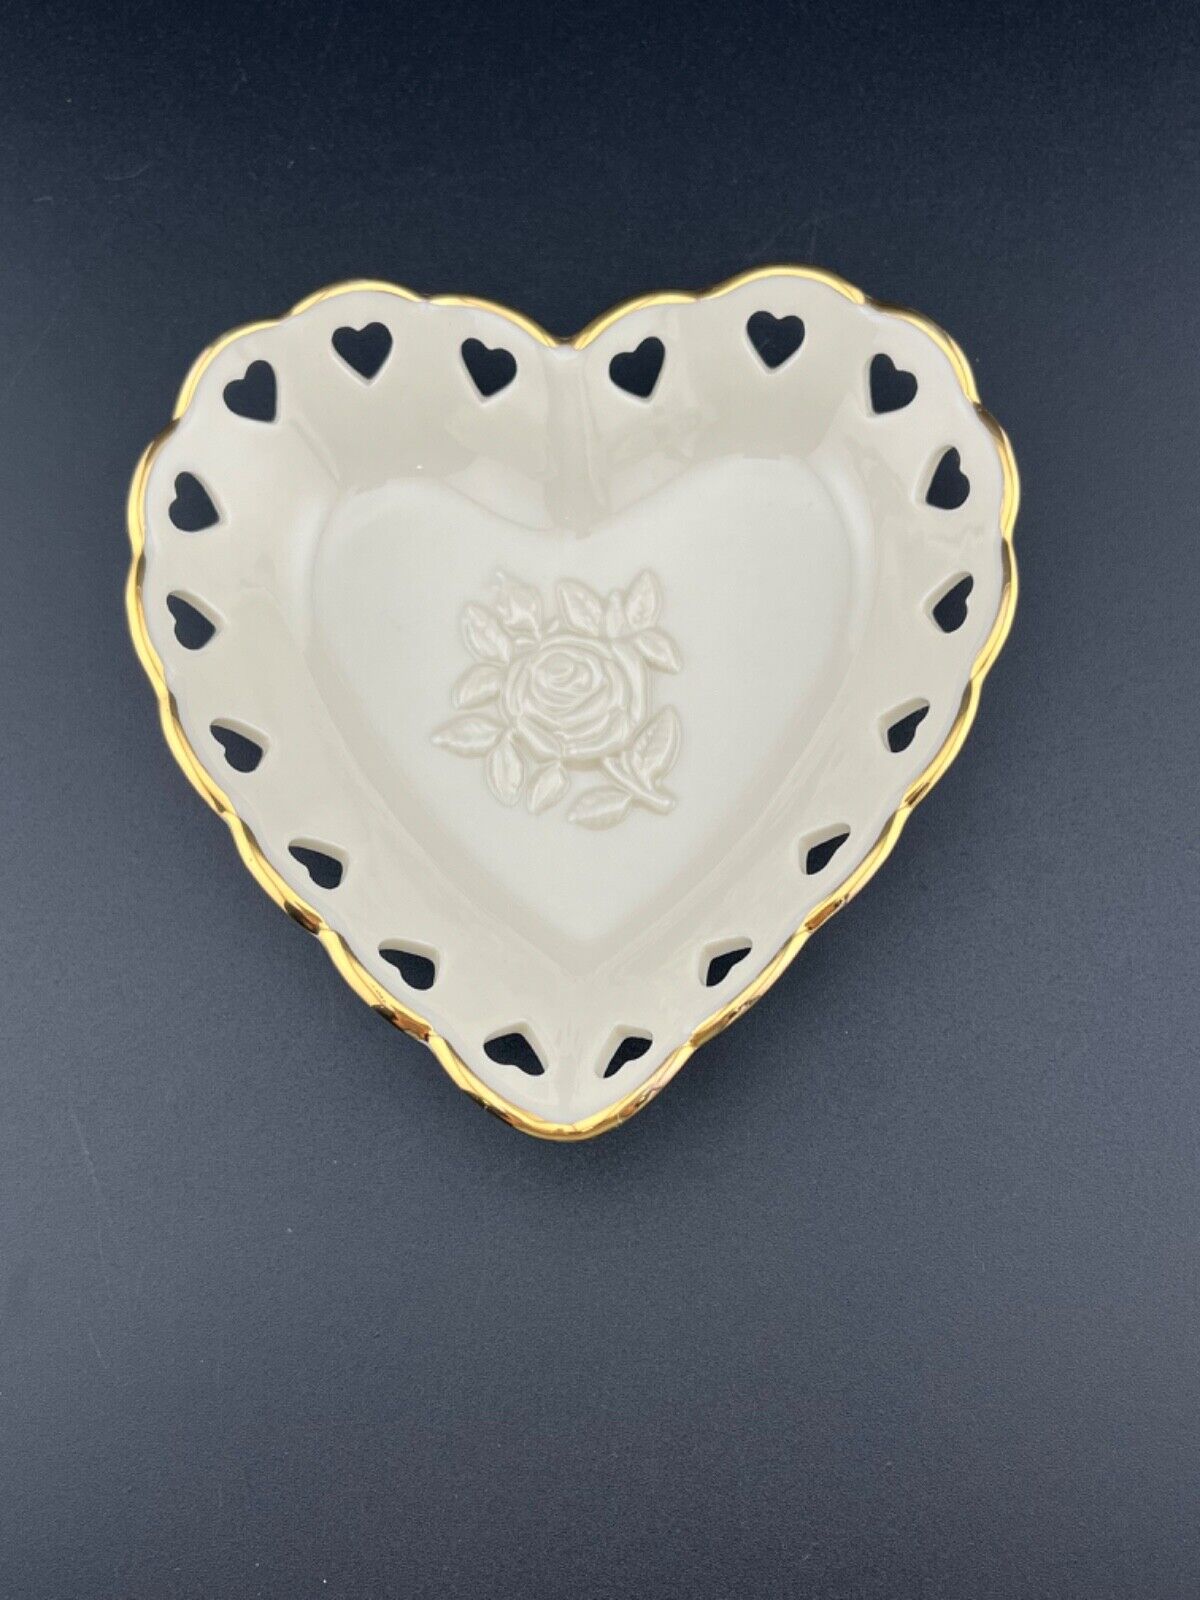 Lenox Heart Shaped Dish - Ivory with Gold Trim & Heart Shaped Cutouts & Rose 